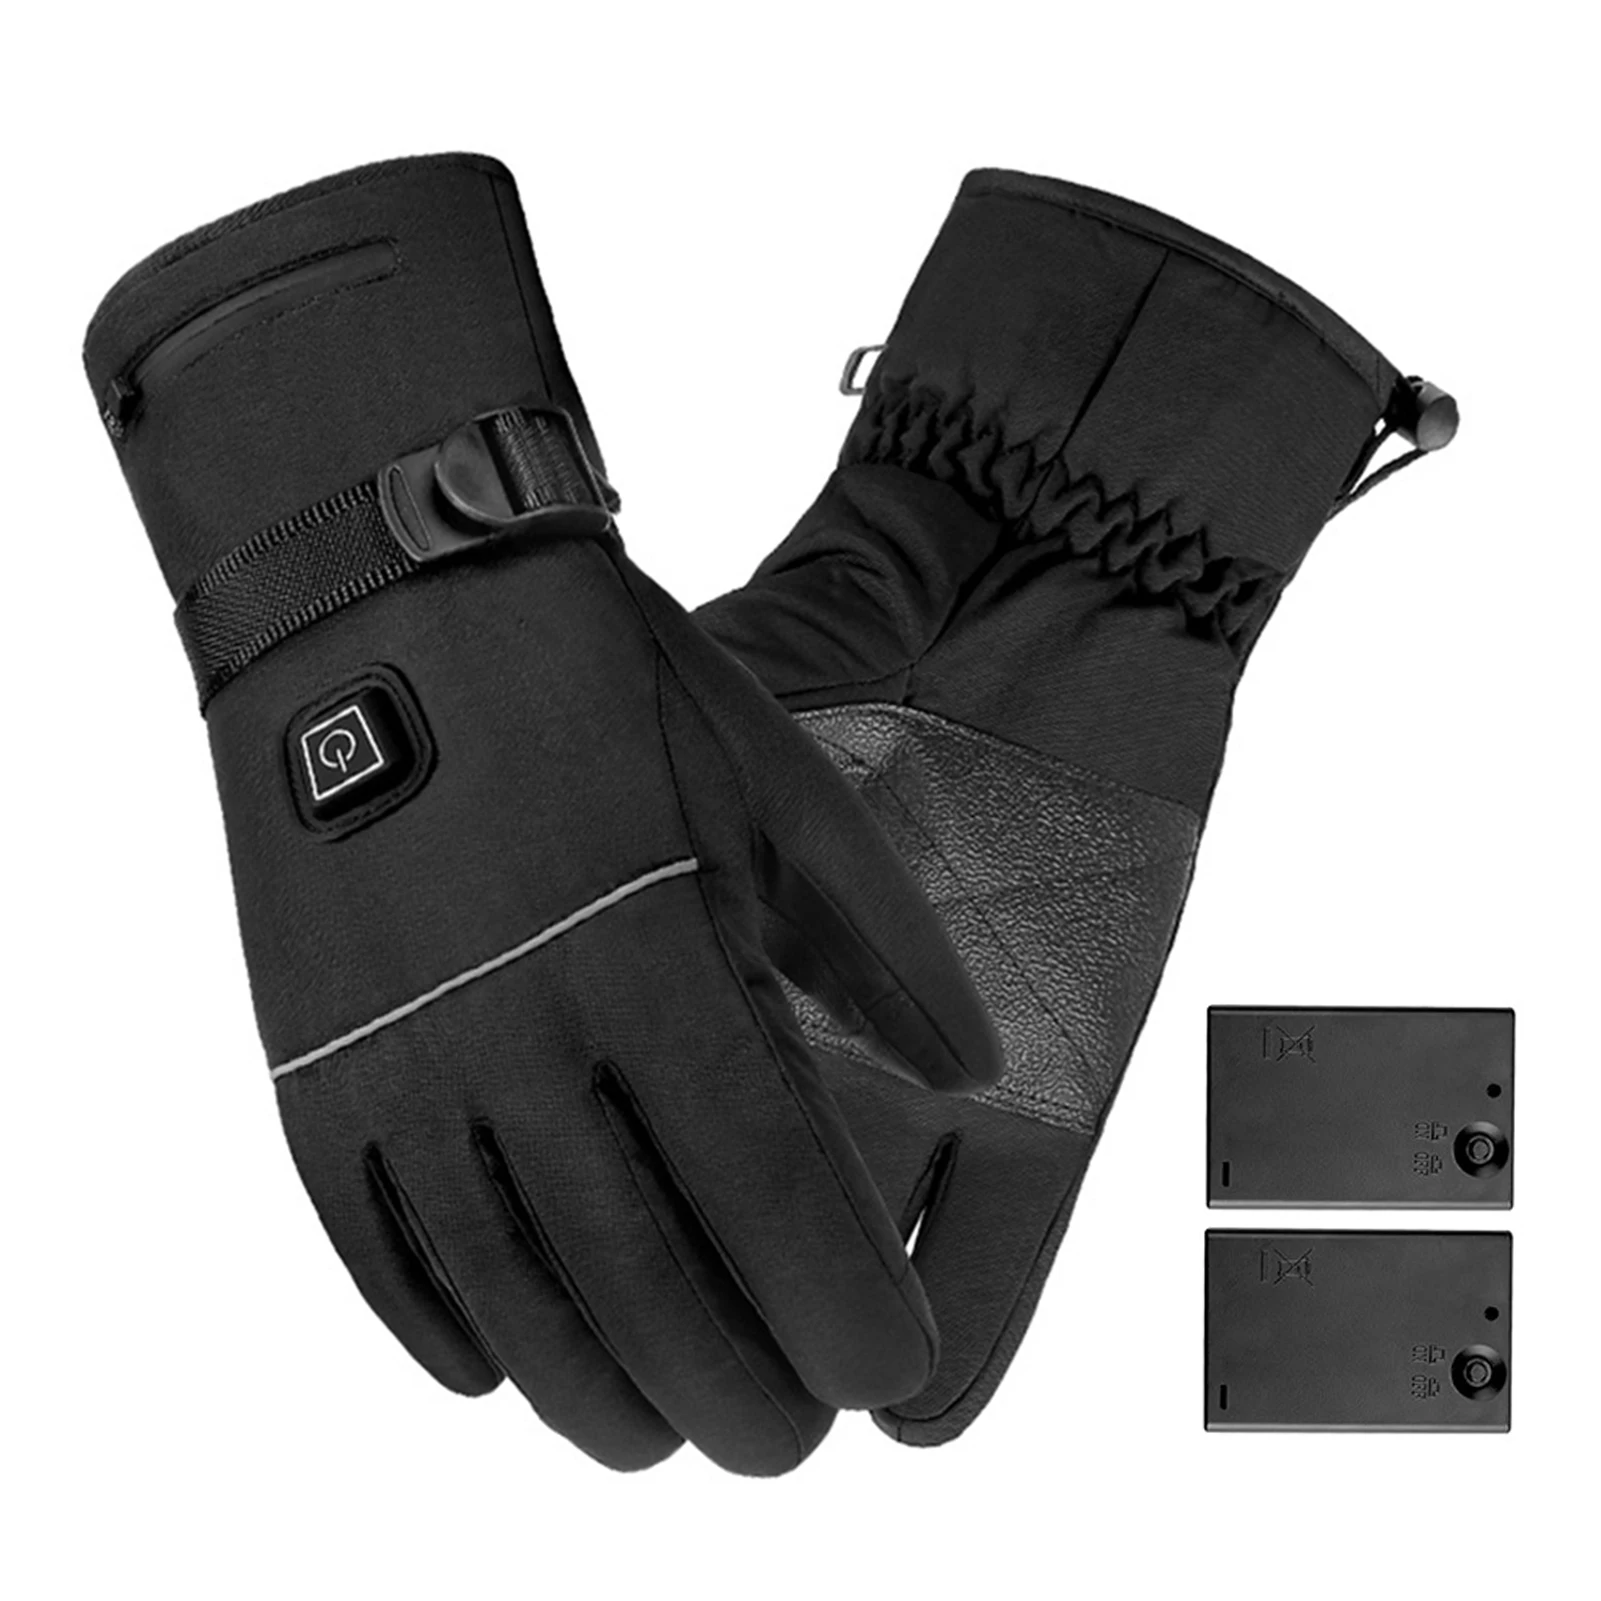 Heated Glove For Men Women Built-in Battery Electric Heated Gloves With 3 Heating Levels Winter Warm Glove Liners For Riding Ski